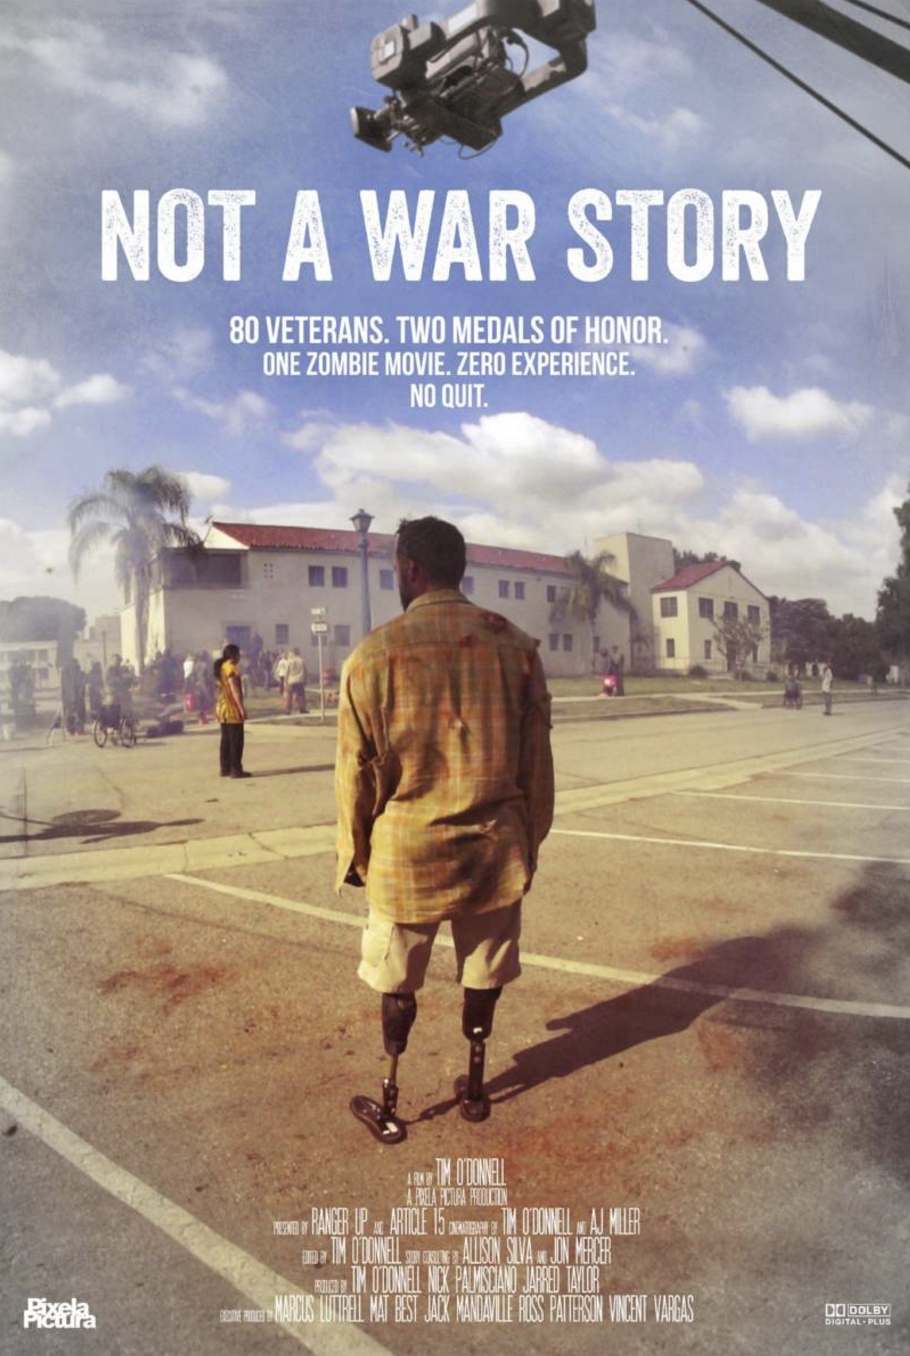 Nick Palmisciano - Producer of 'Not A War Story'